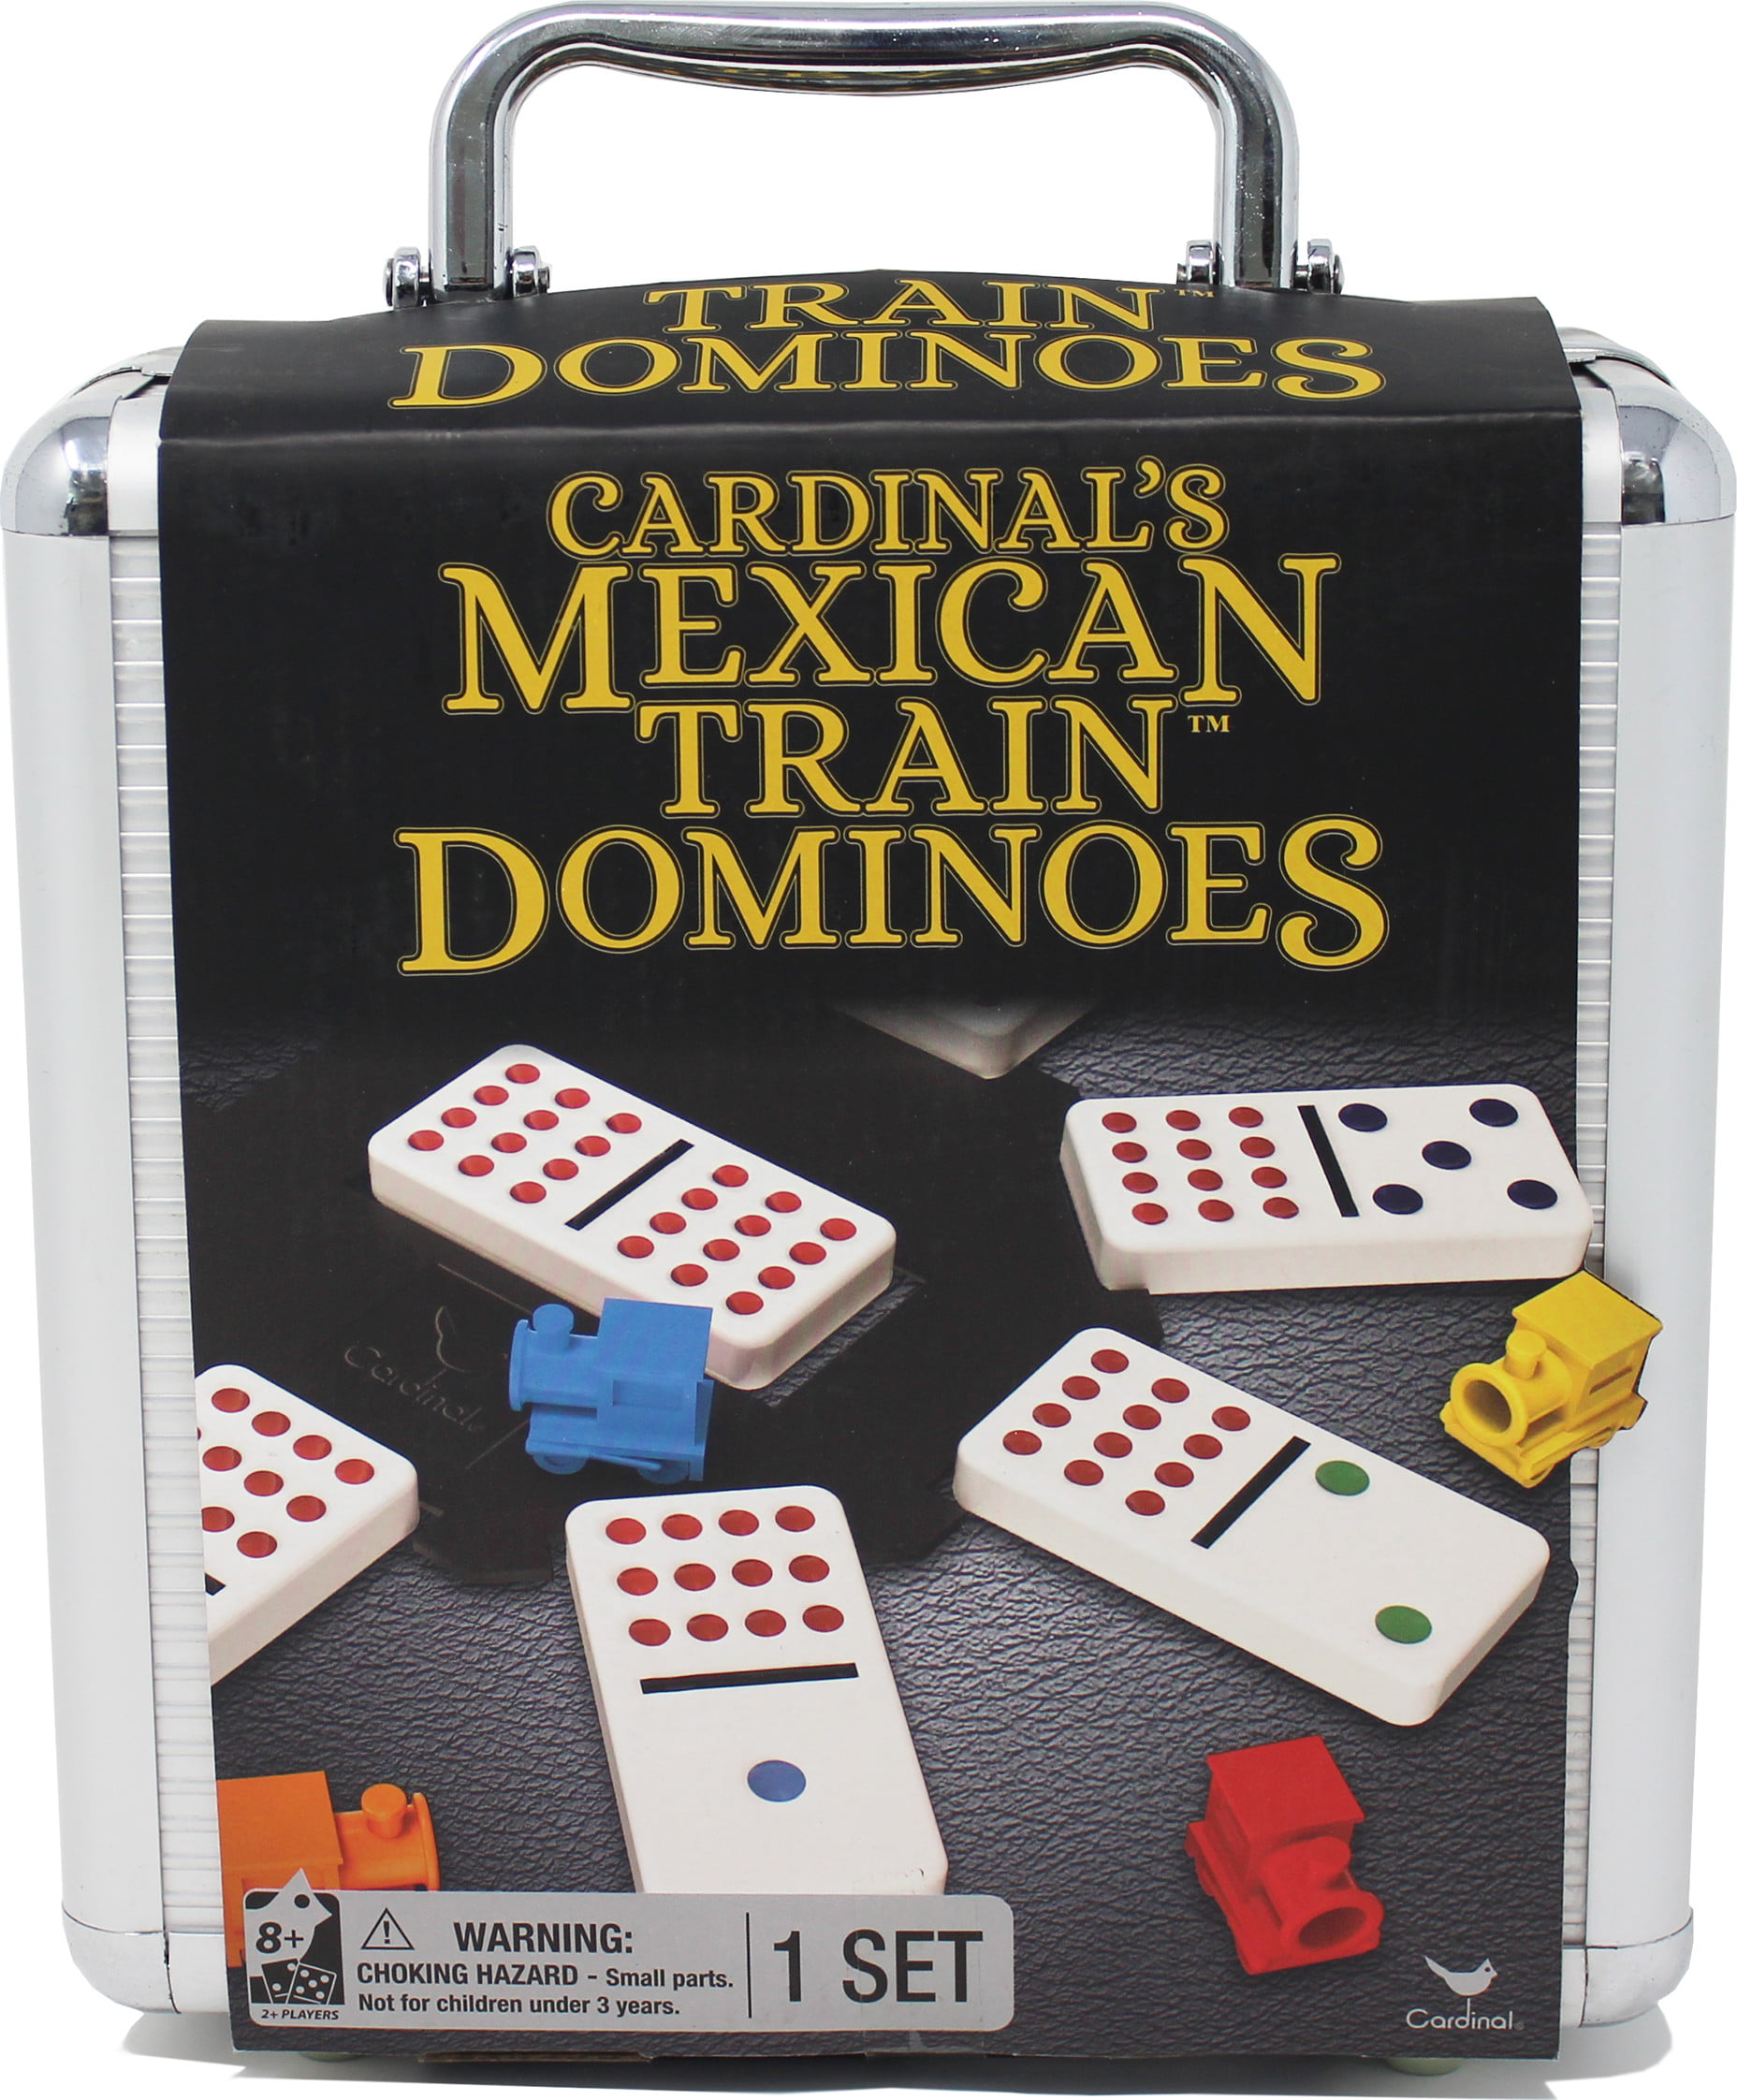 Puremco Mexican Train Dominoes to Go Never for sale online 